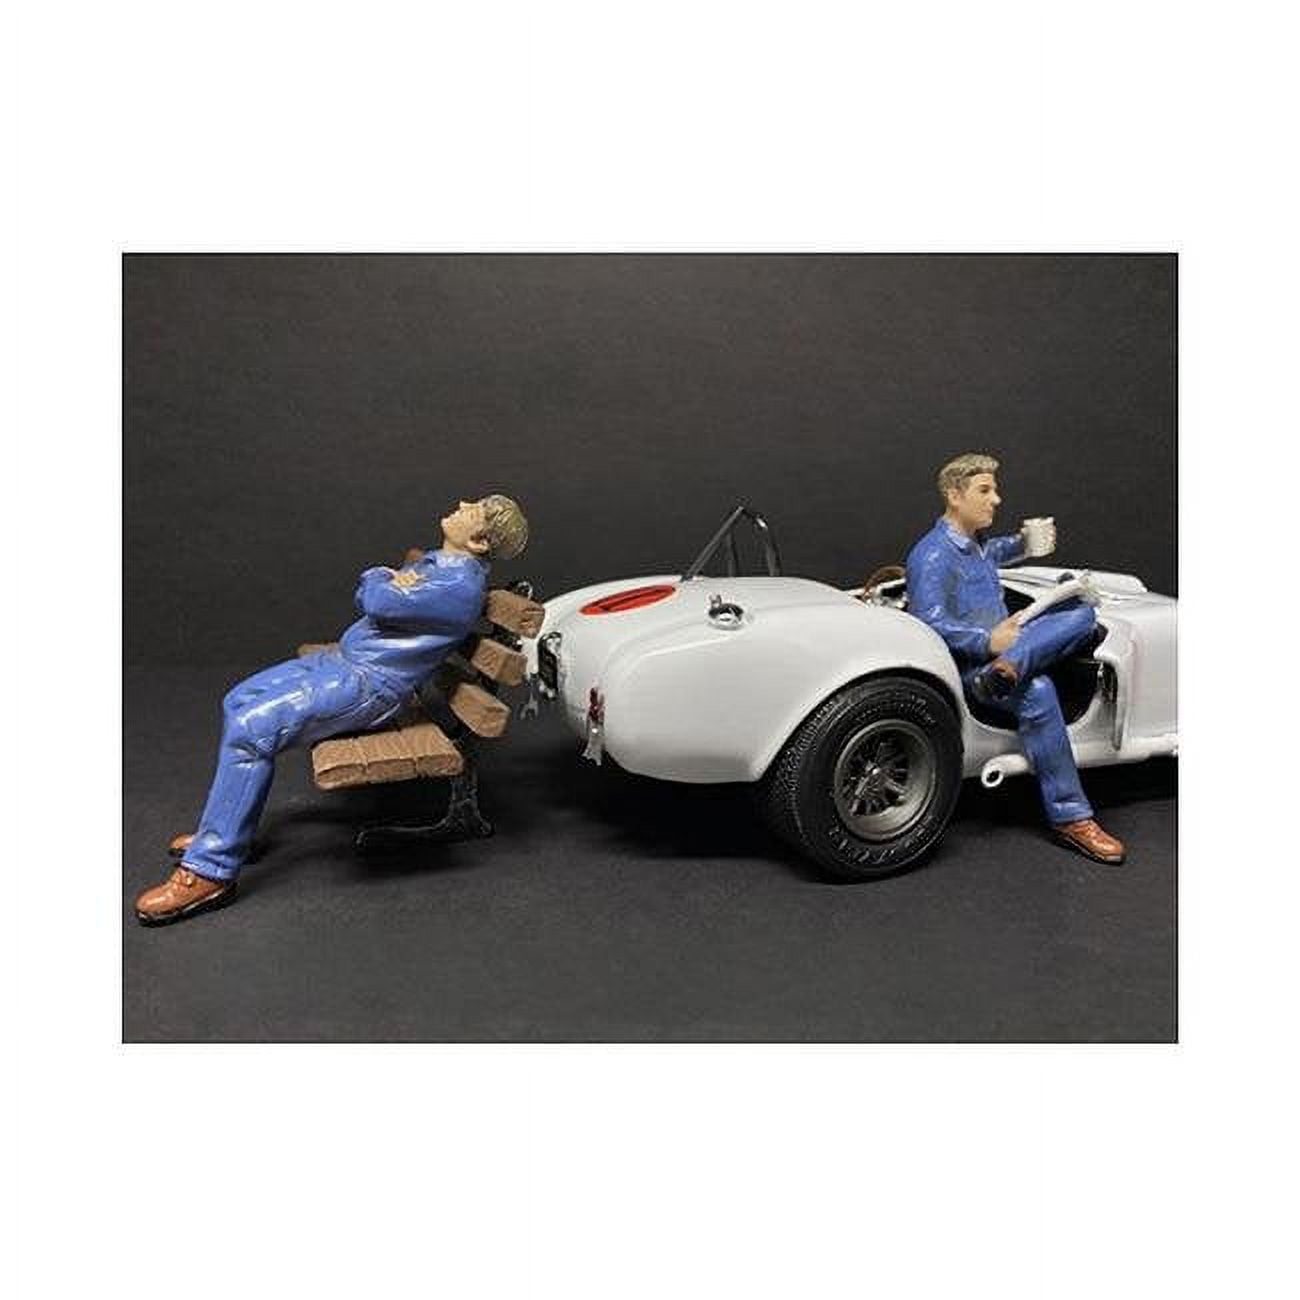 Picture of American Diorama 38232-38233 Sitting Mechanics 2 Piece Figurine Set for 1 by 18 Scale Models